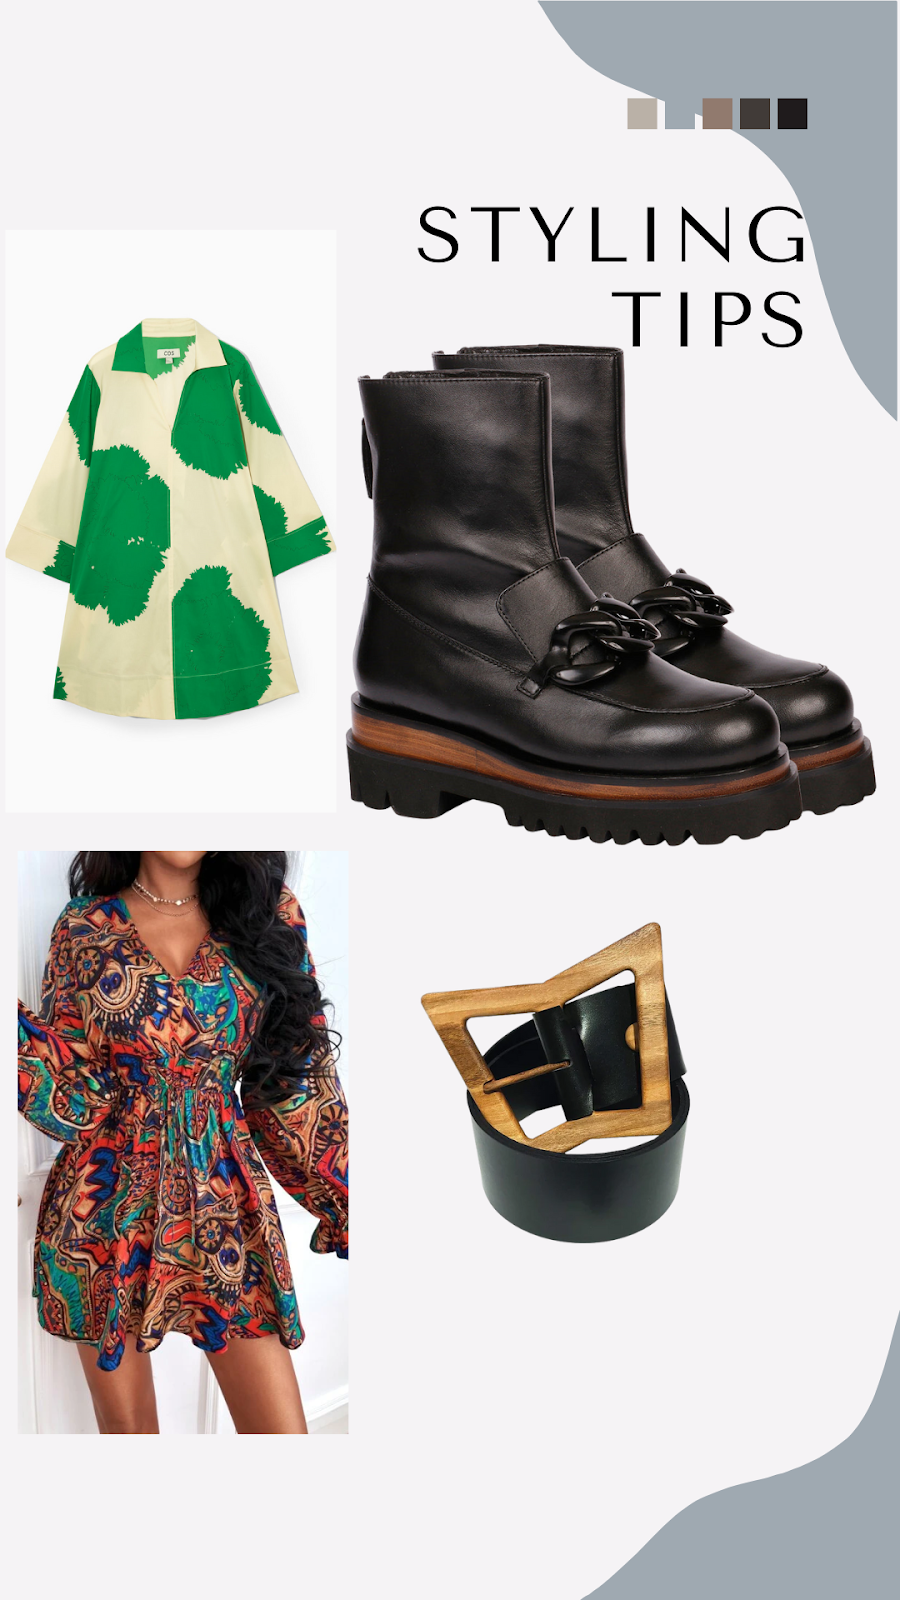 Alyson Black Leather Boots from Saint G and Bryce Belt Black from Wood Belt Plus Colored Printed Dress